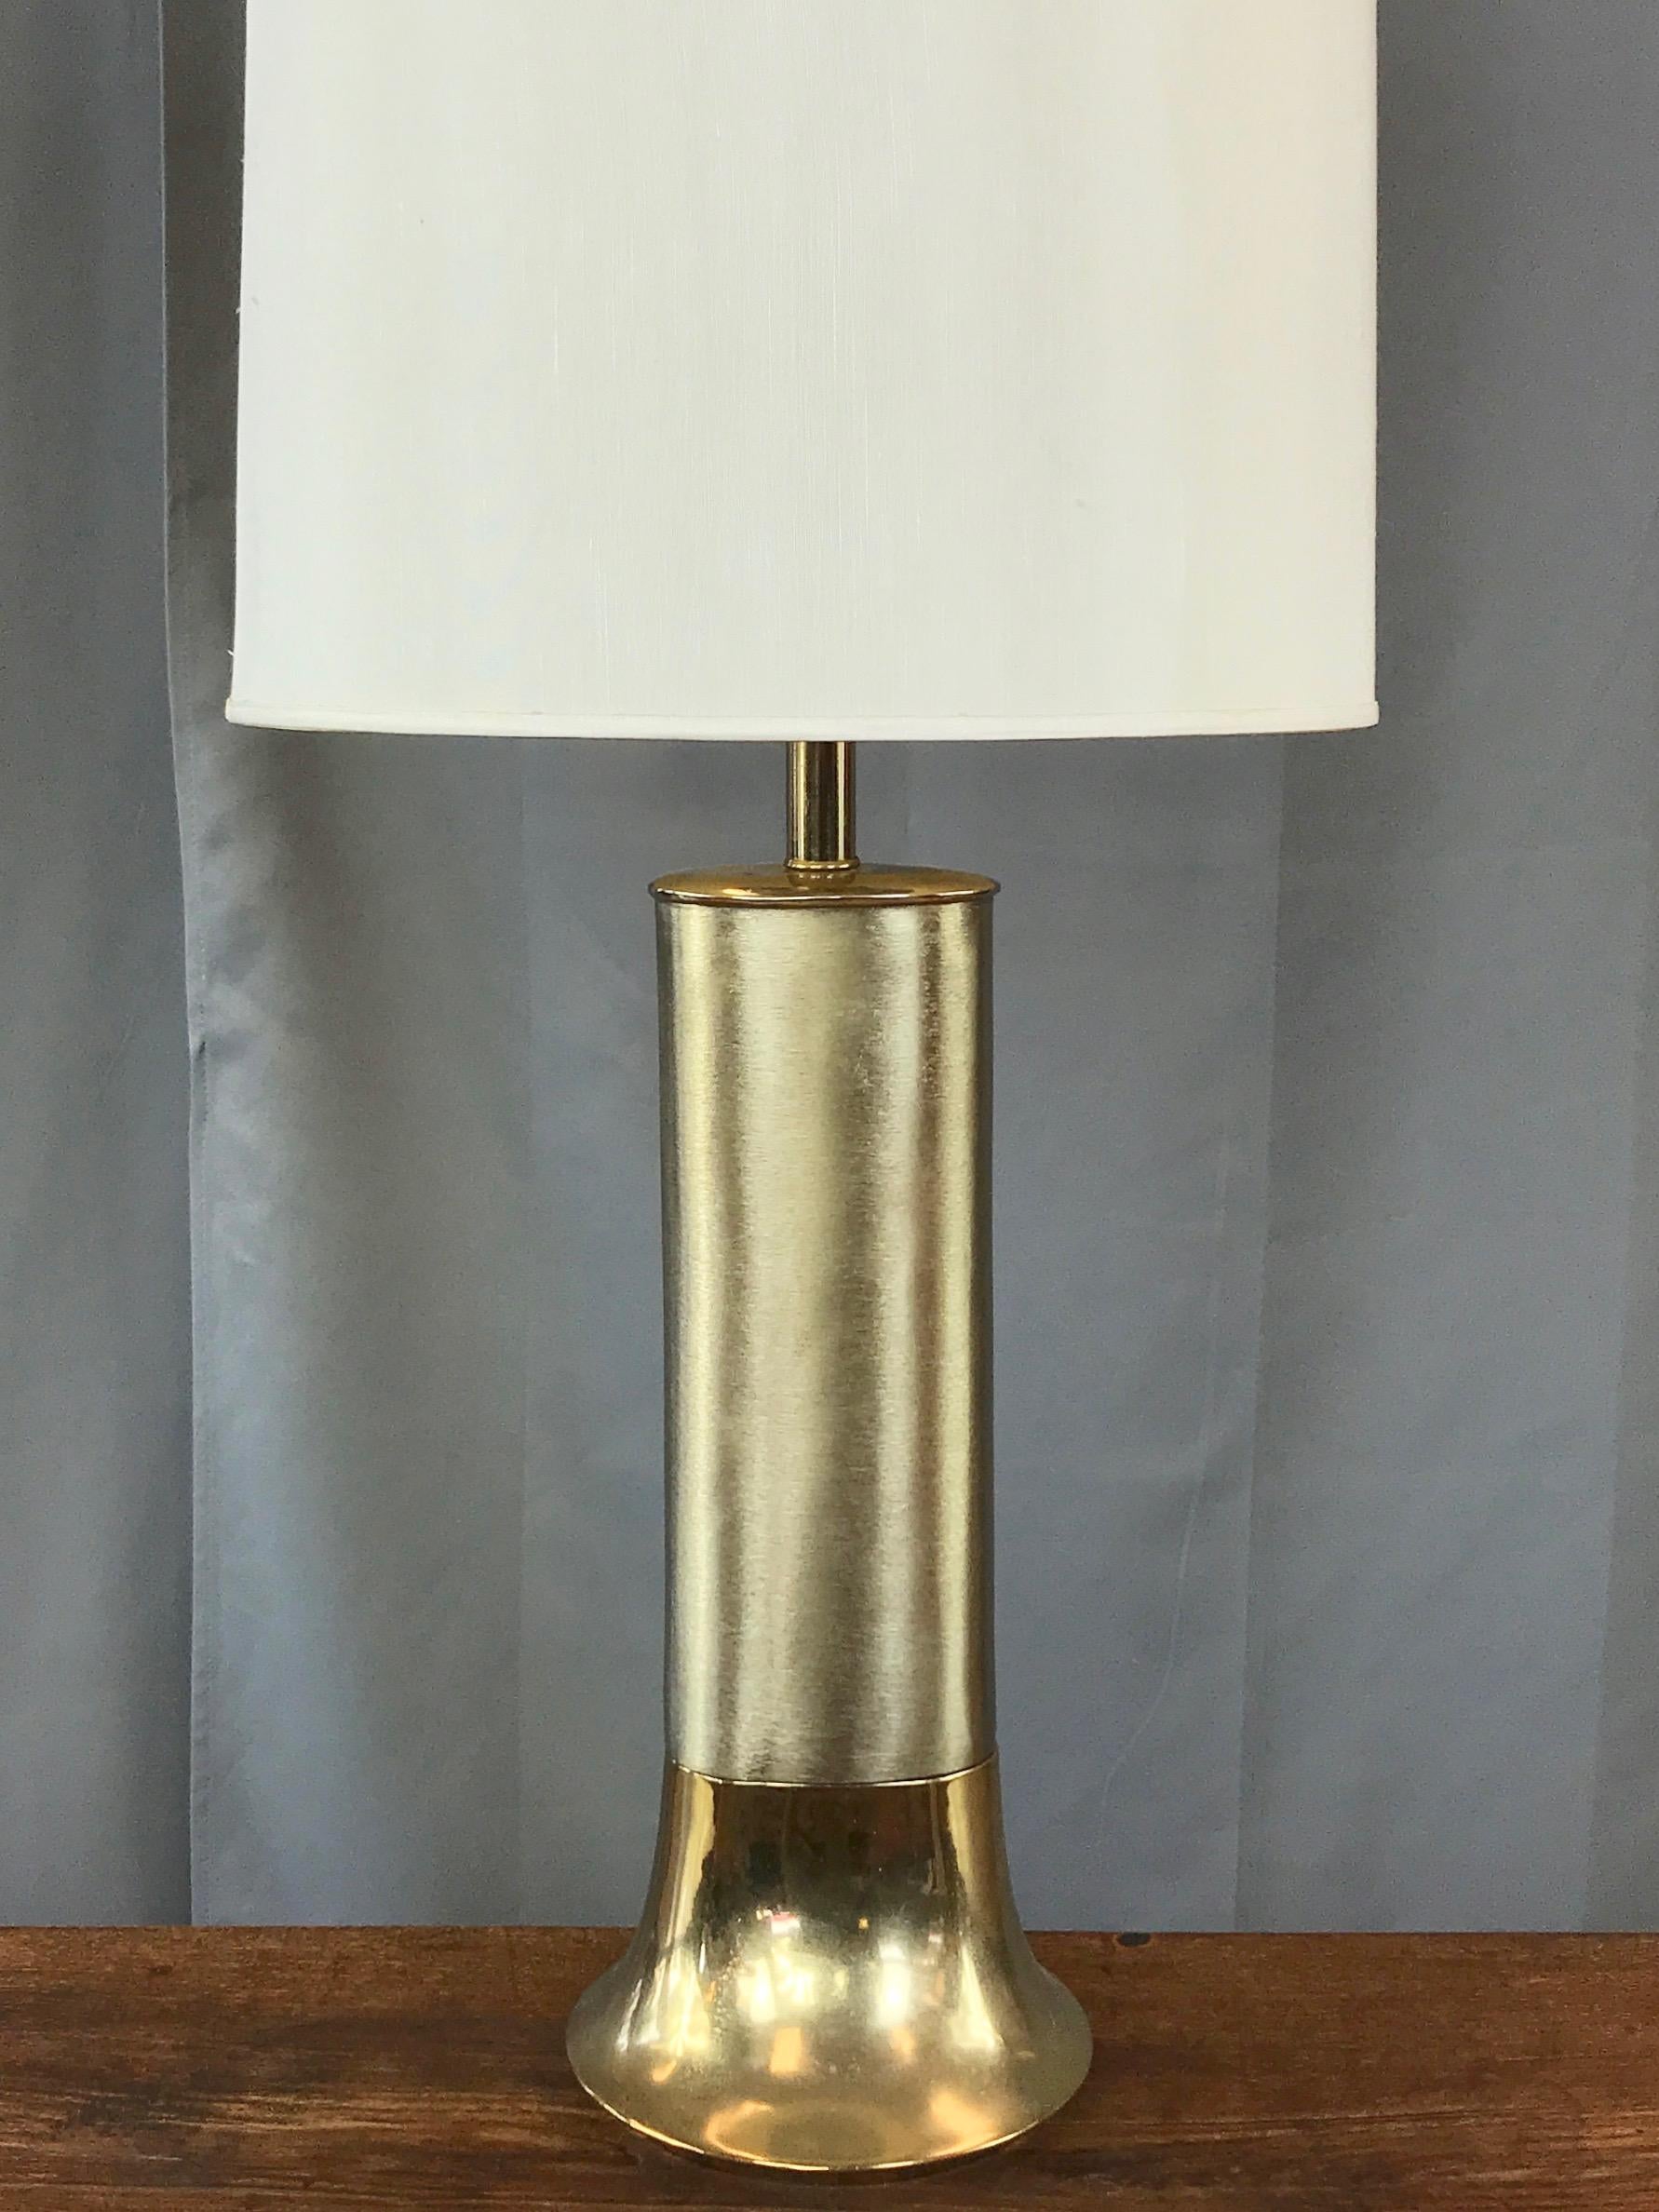 A very uncommon streamlined polished and brushed brass midcentury table lamp by Laurel Lamp Company.

Sleek, Minimalist form with flared polished brass base that transitions to an oval brushed brass body with polished brass top. A sculptural 1960s